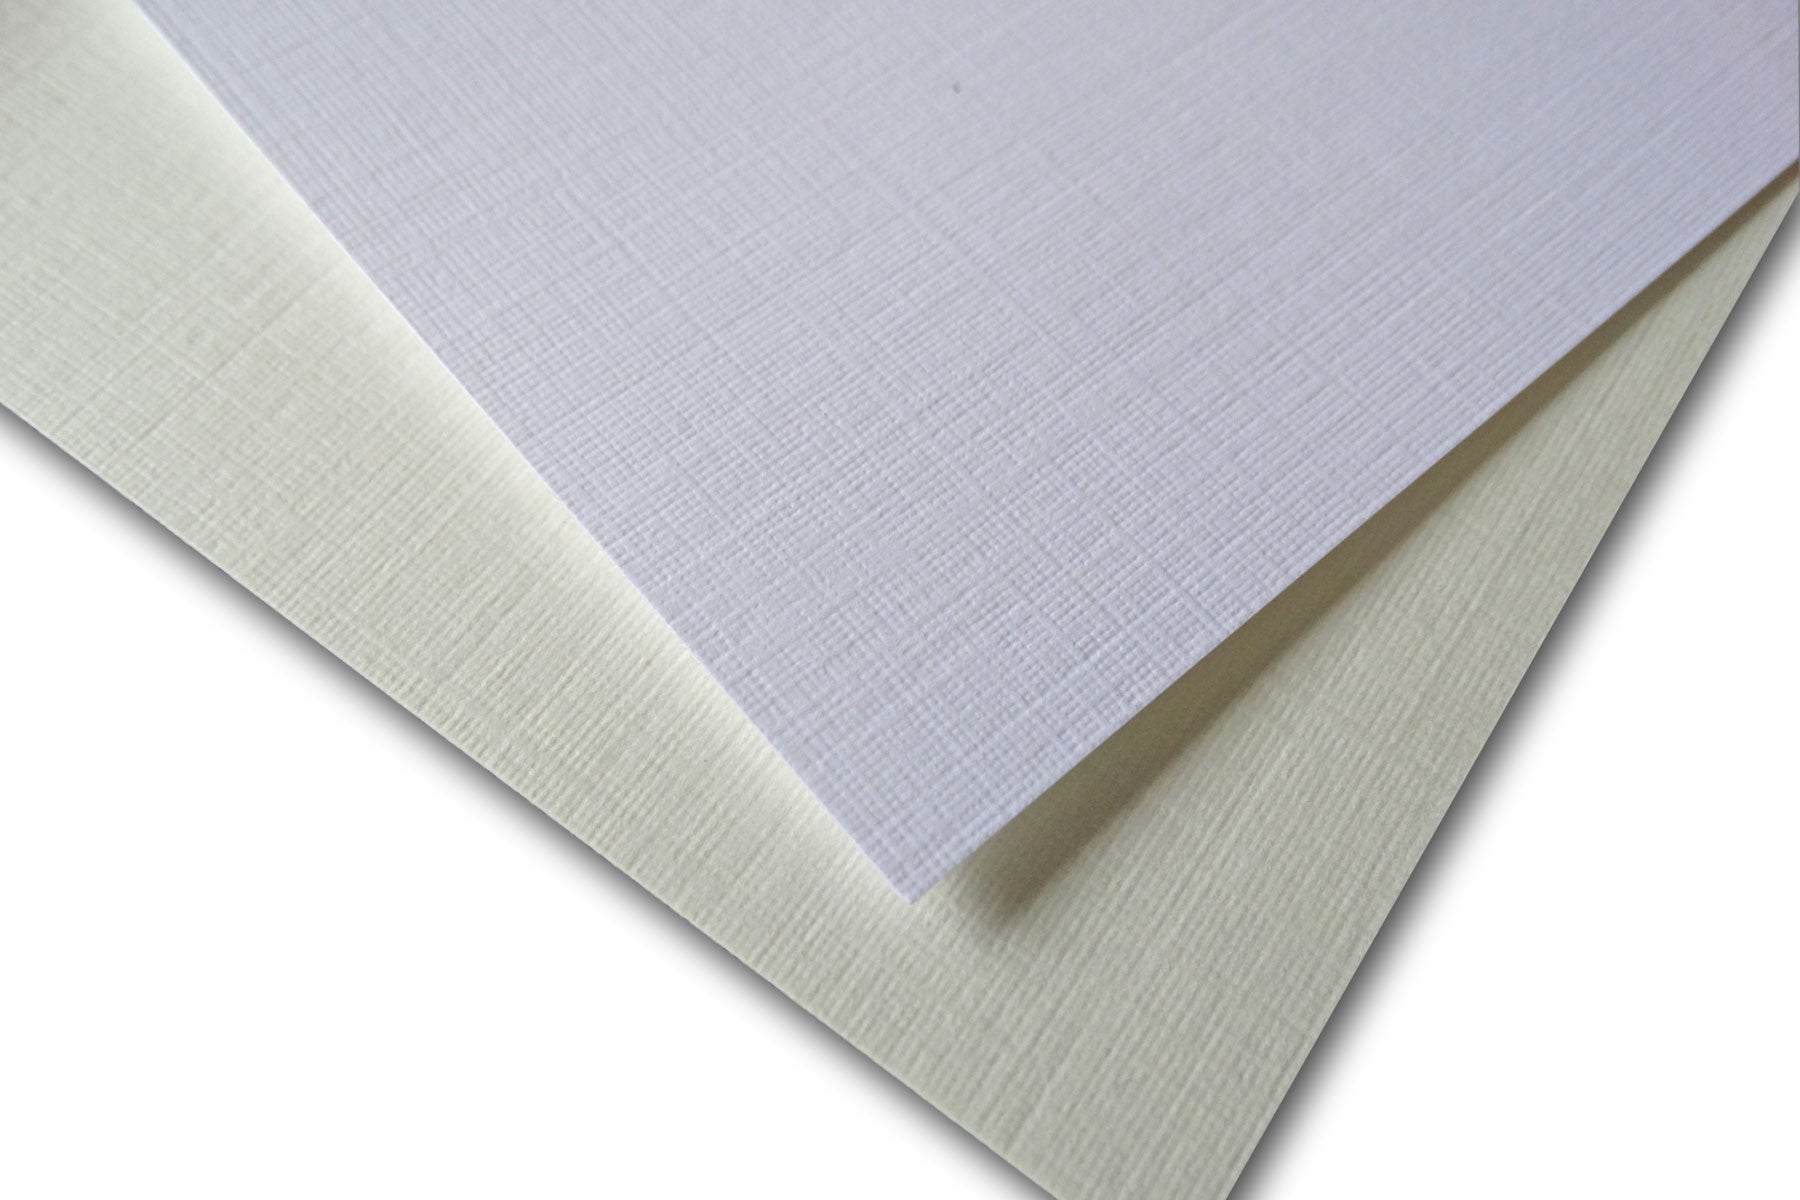 Classic Cream Card Stock - 8 1/2 x 11 in 80 lb Cover Smooth